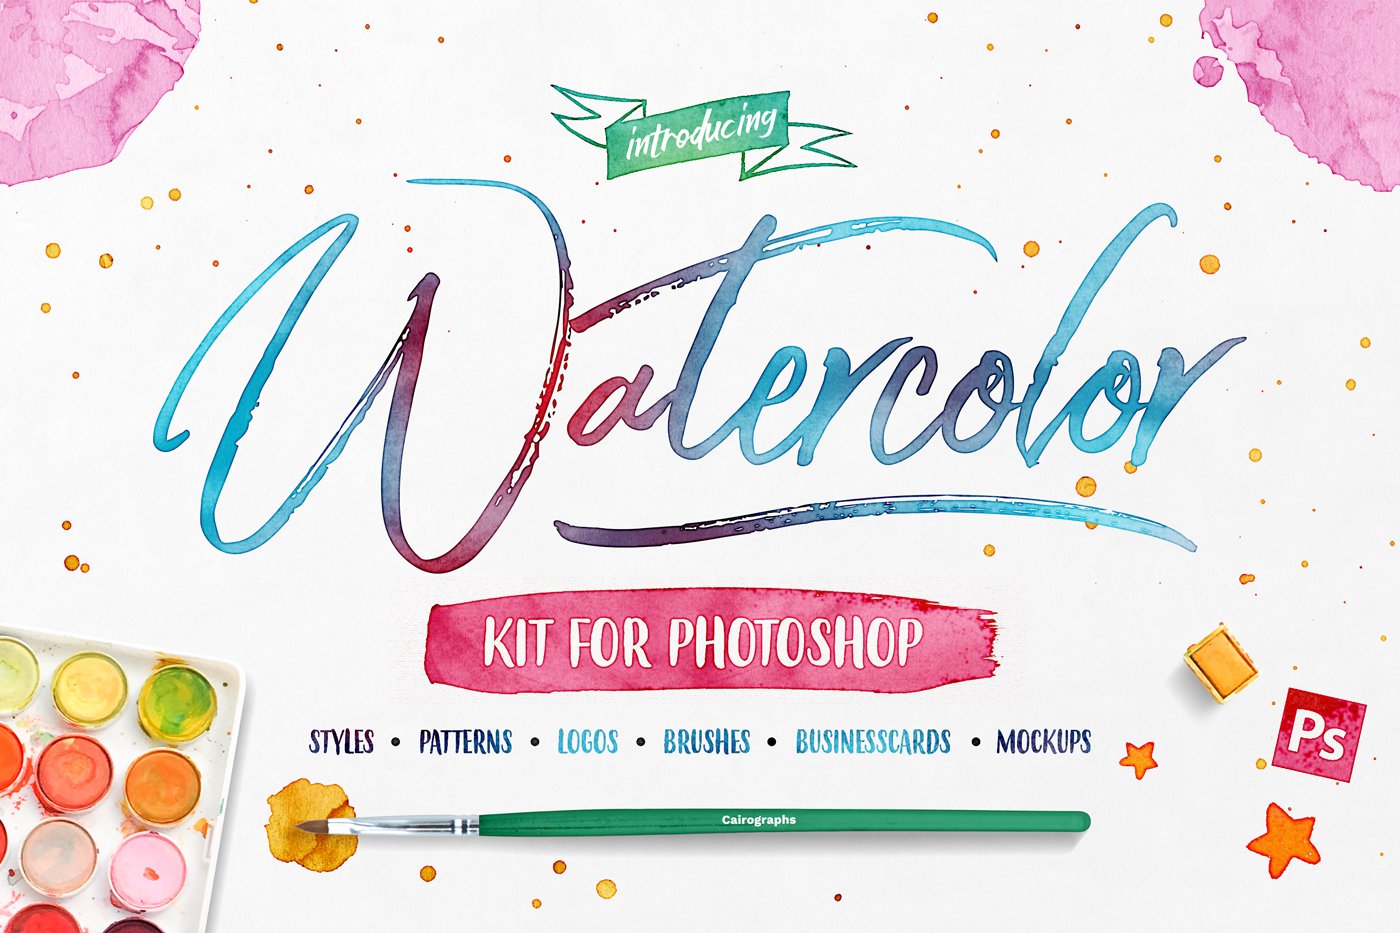 Watercolor Kit For Photoshoppreview image.